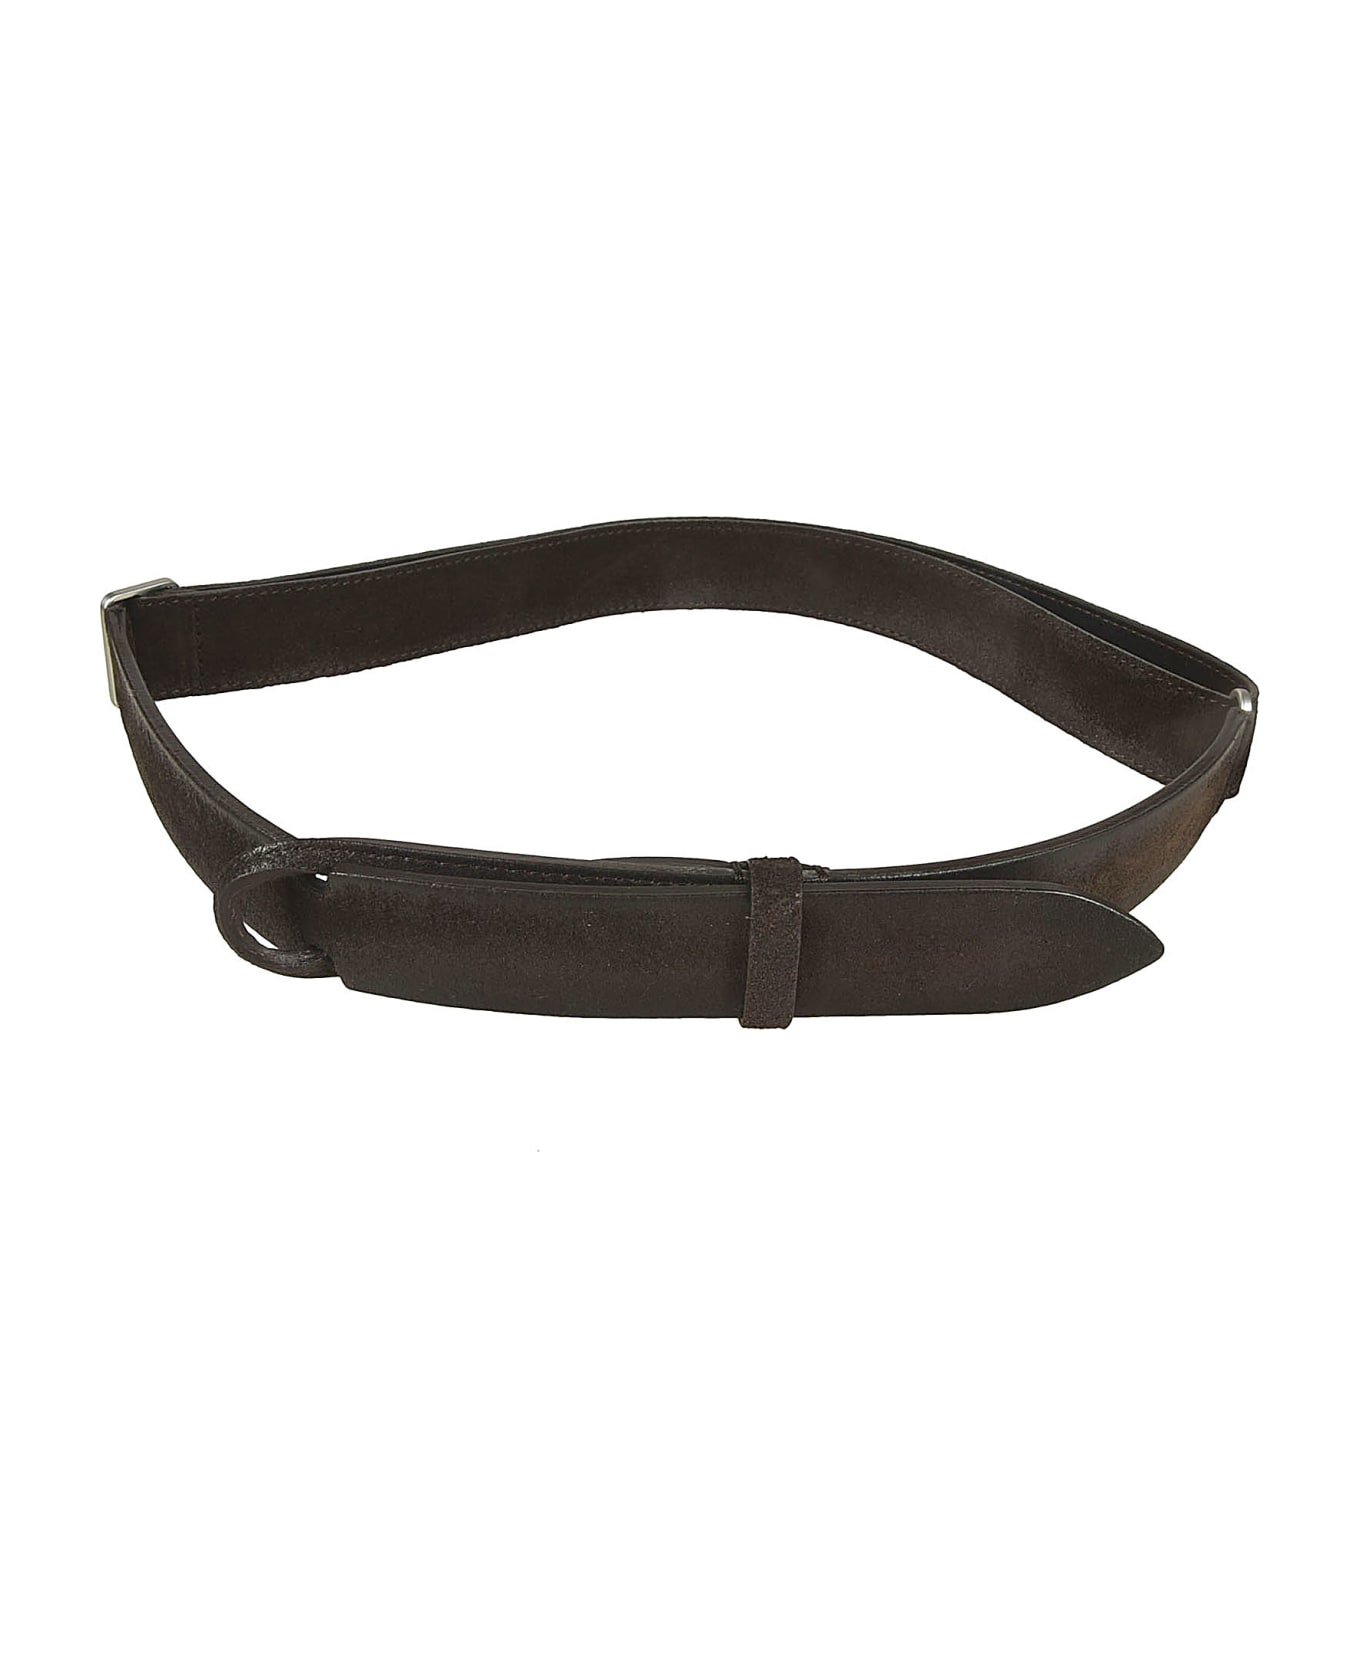 Orciani No Buckle Belt - Brown ベルト